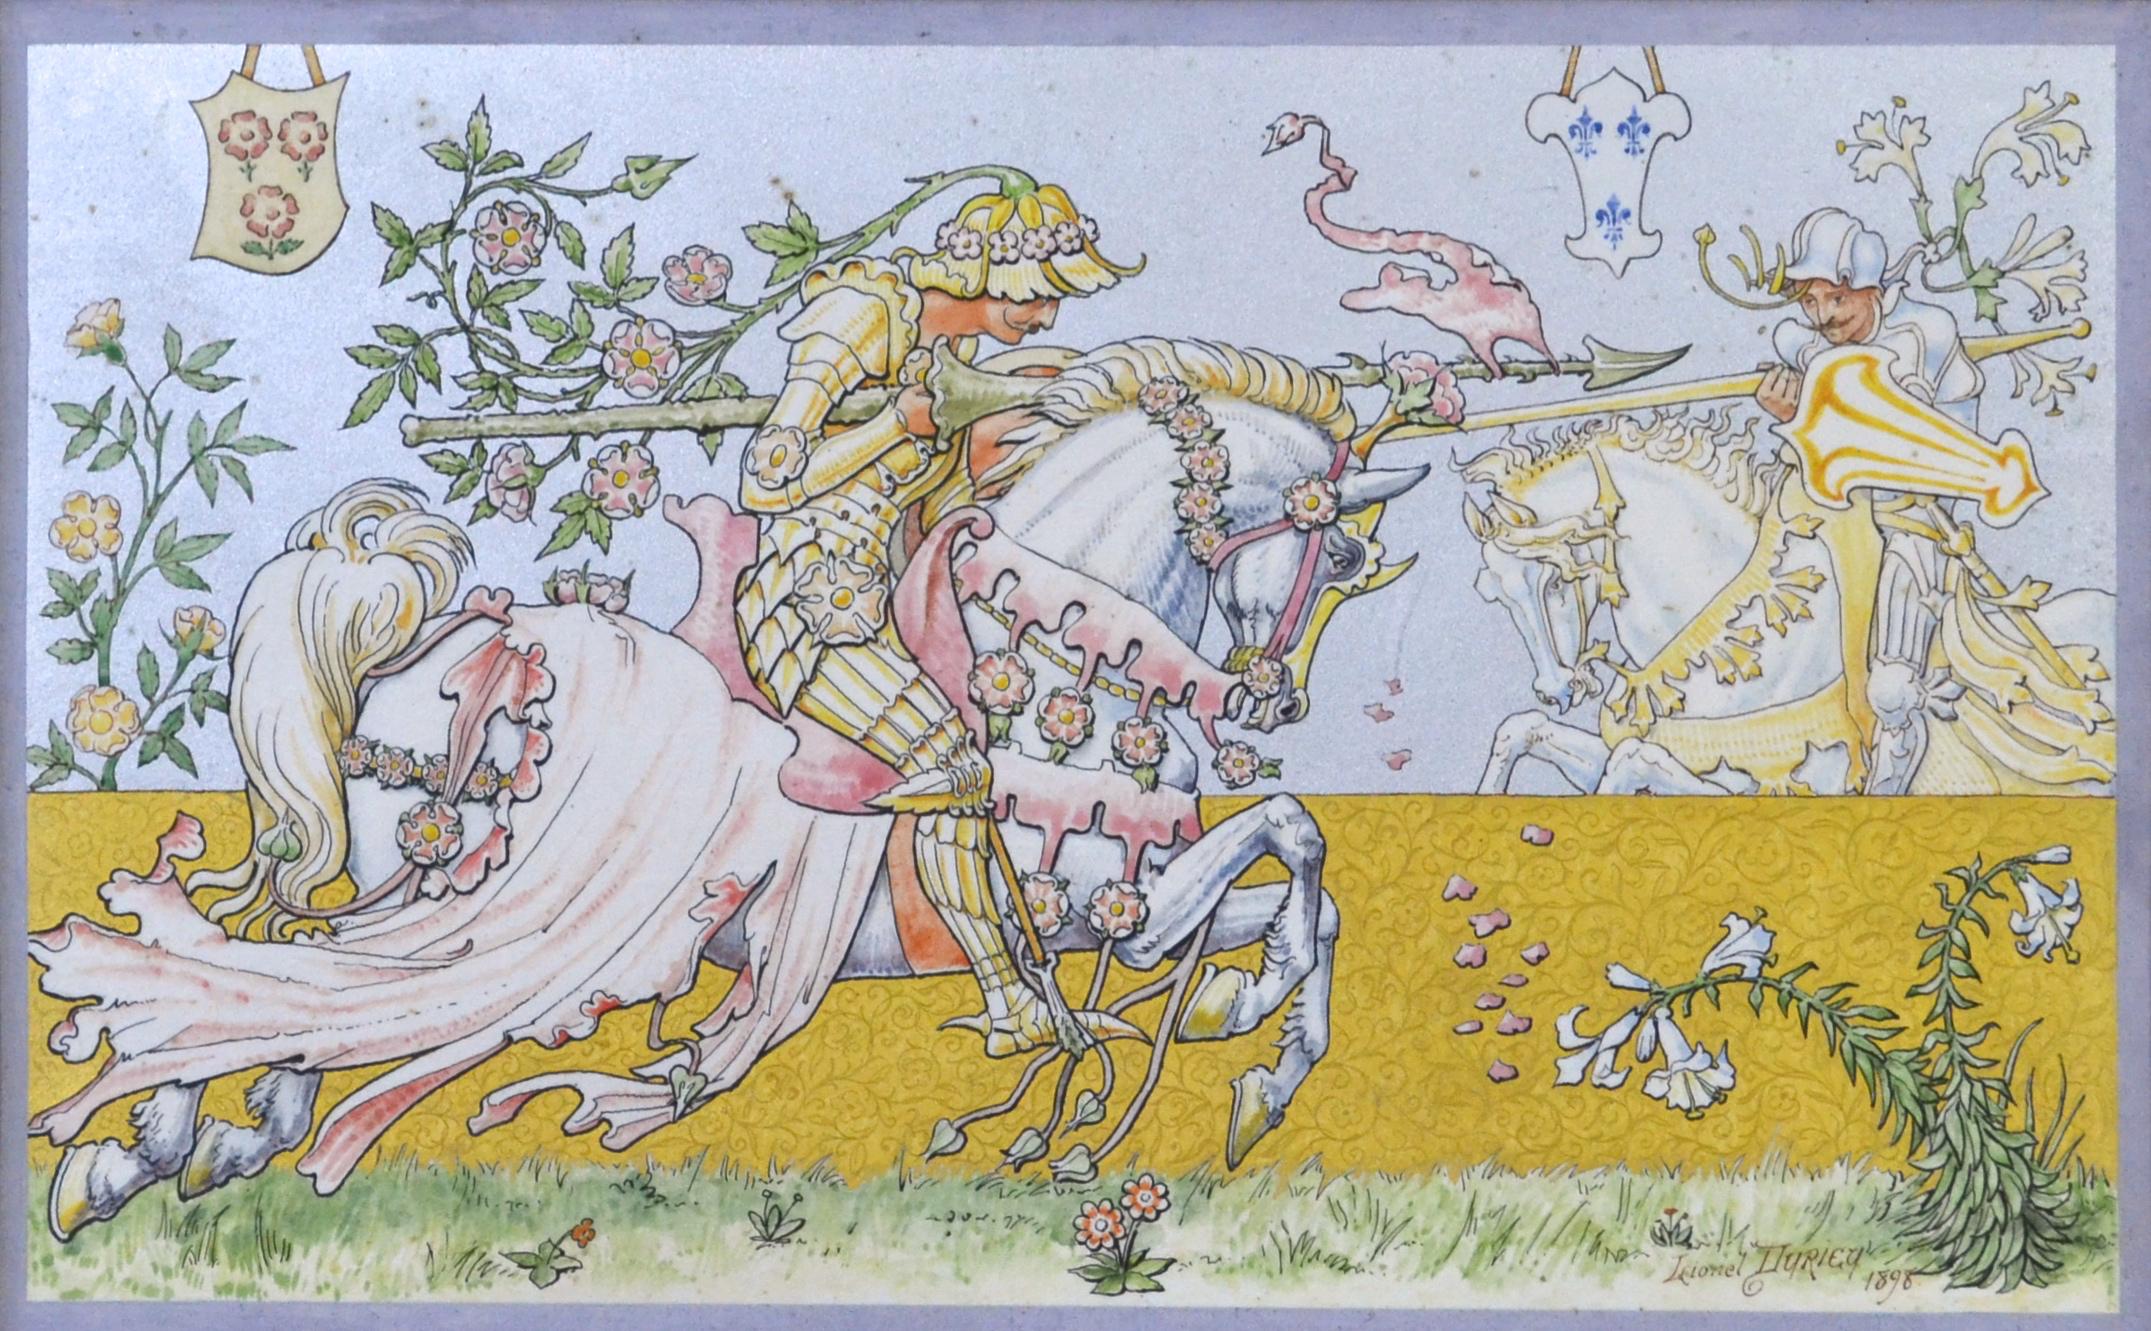 Lionel Durieu Animal Art - The Lily and the Rose - Arts & Crafts watercolour on vellum after Walter Crane